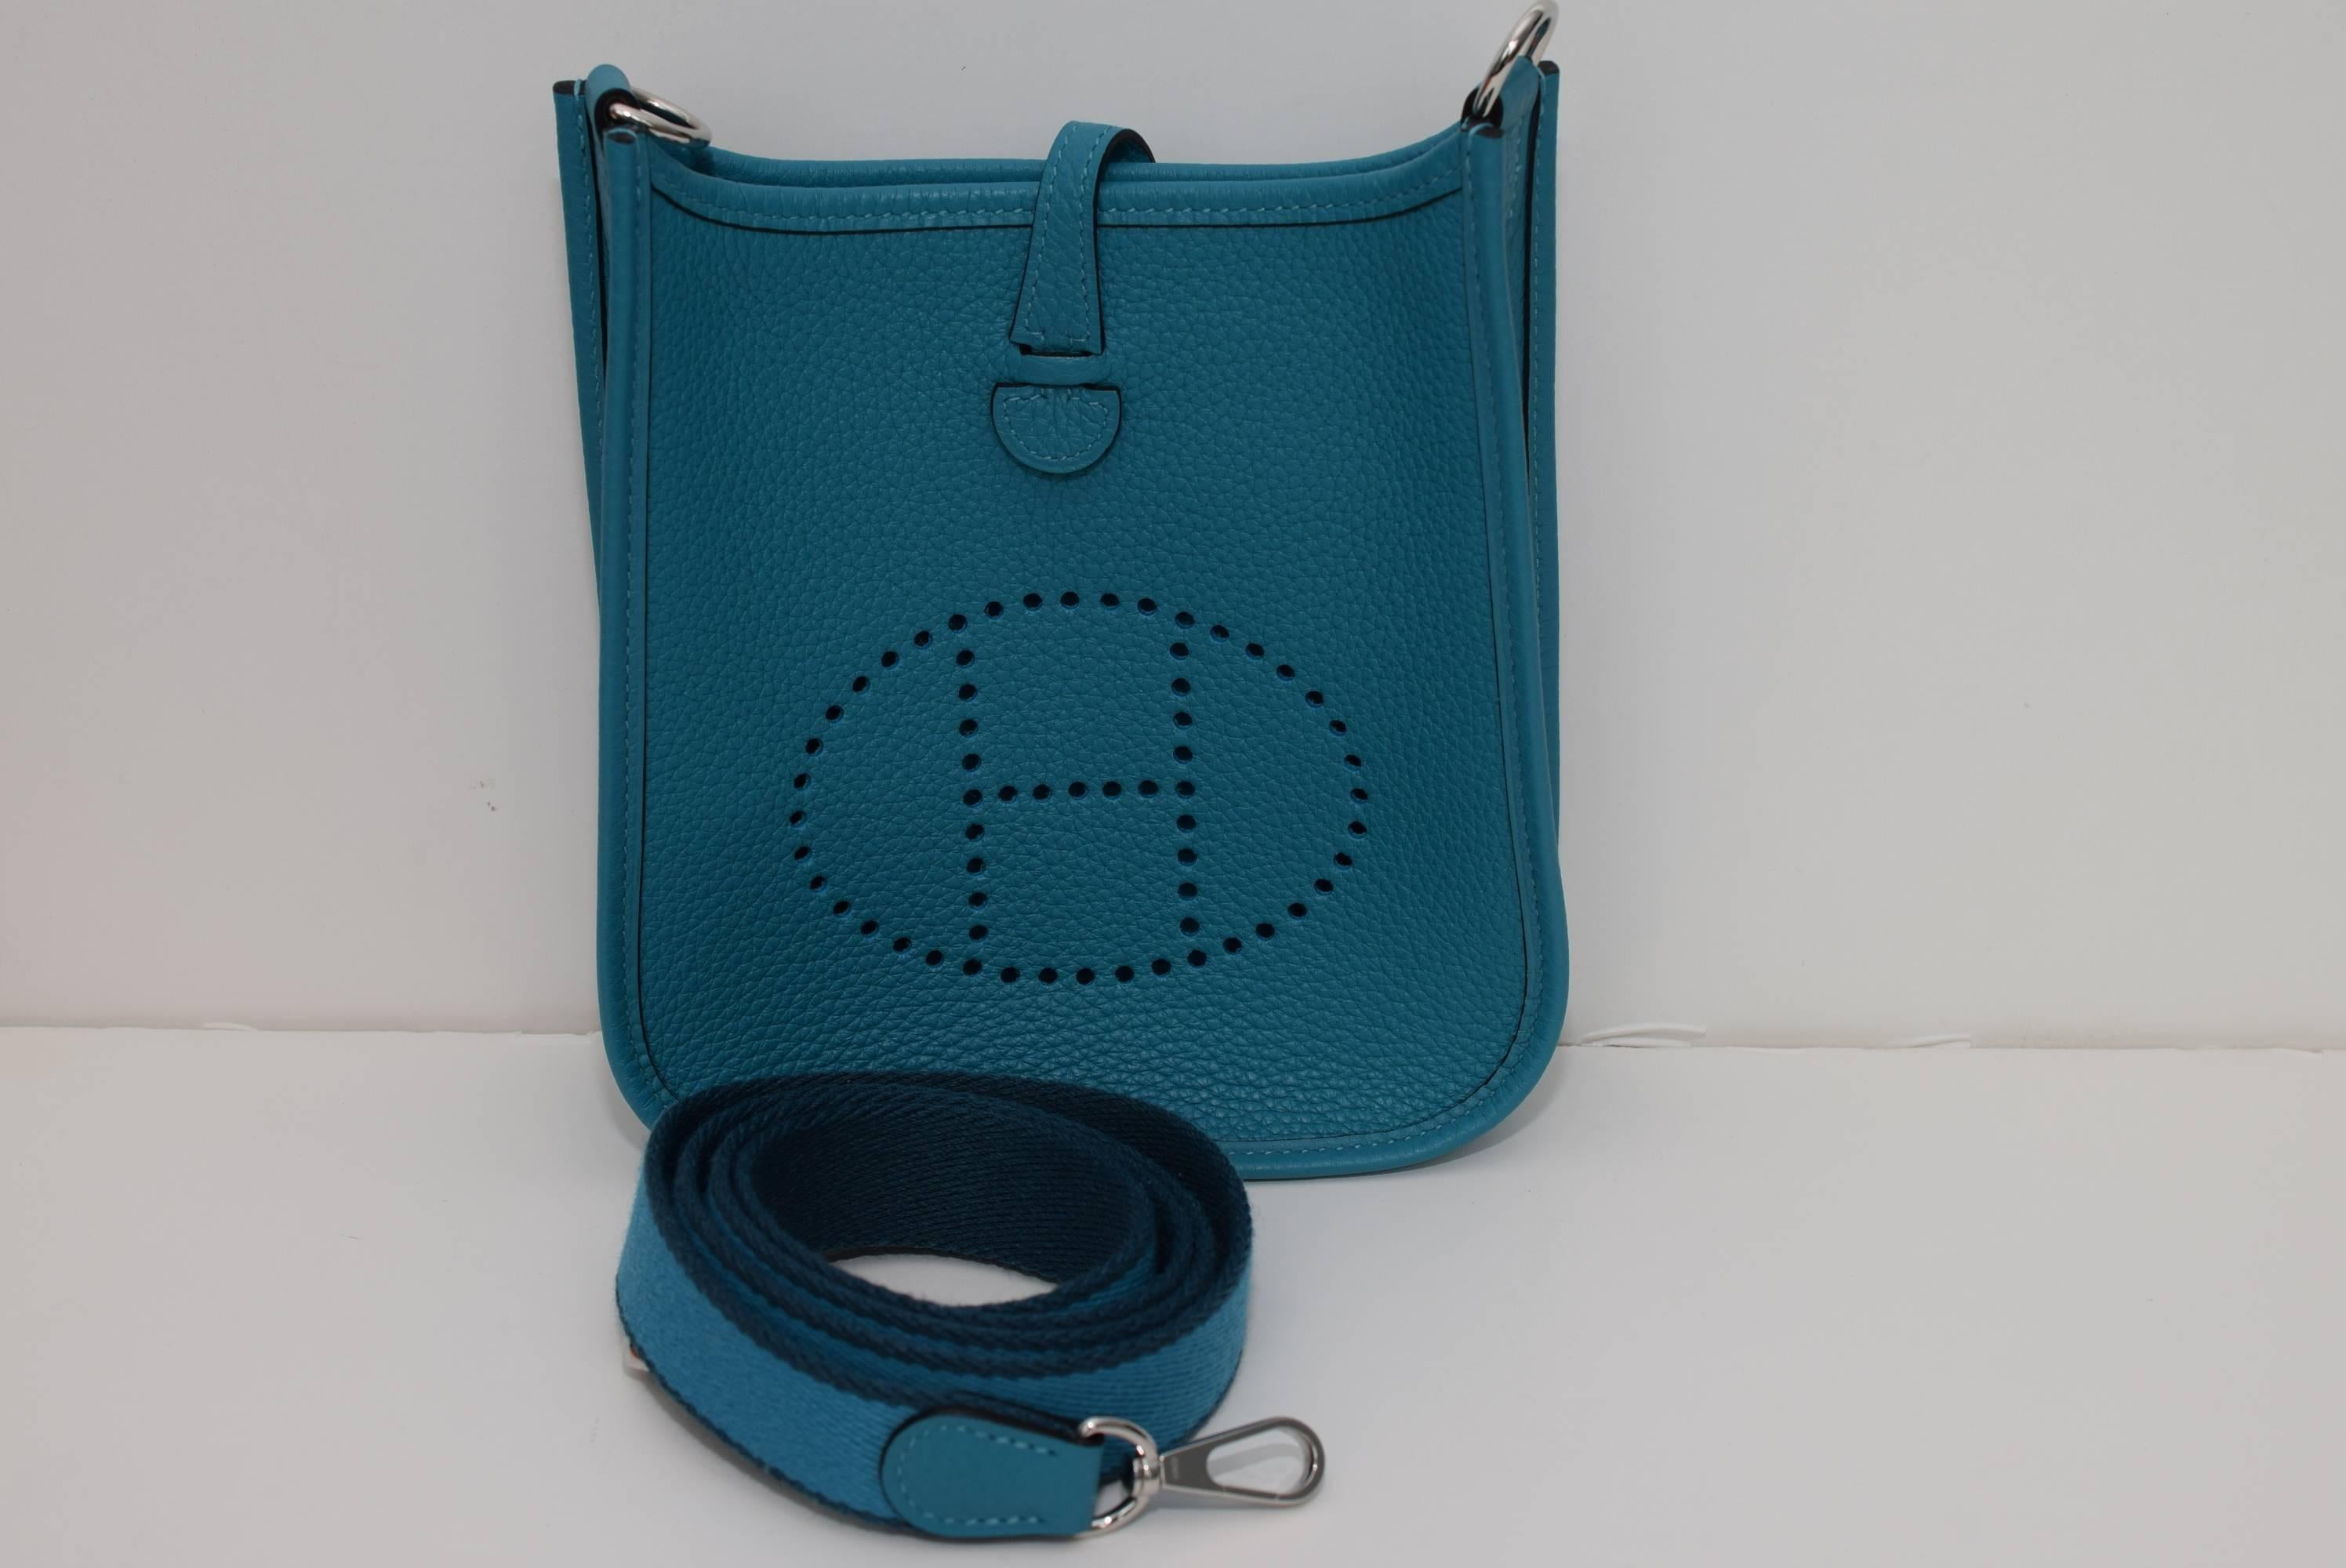 Like New - Hermes Mini Evelyn in Turquoise blue. Comes with box, dust bags and receipt.
Date code: R square Circa 2014. Excellent condition. Free priority shipping both ways. Perfect cross body bag fits all the essentials: phone, wallet, lipstick,